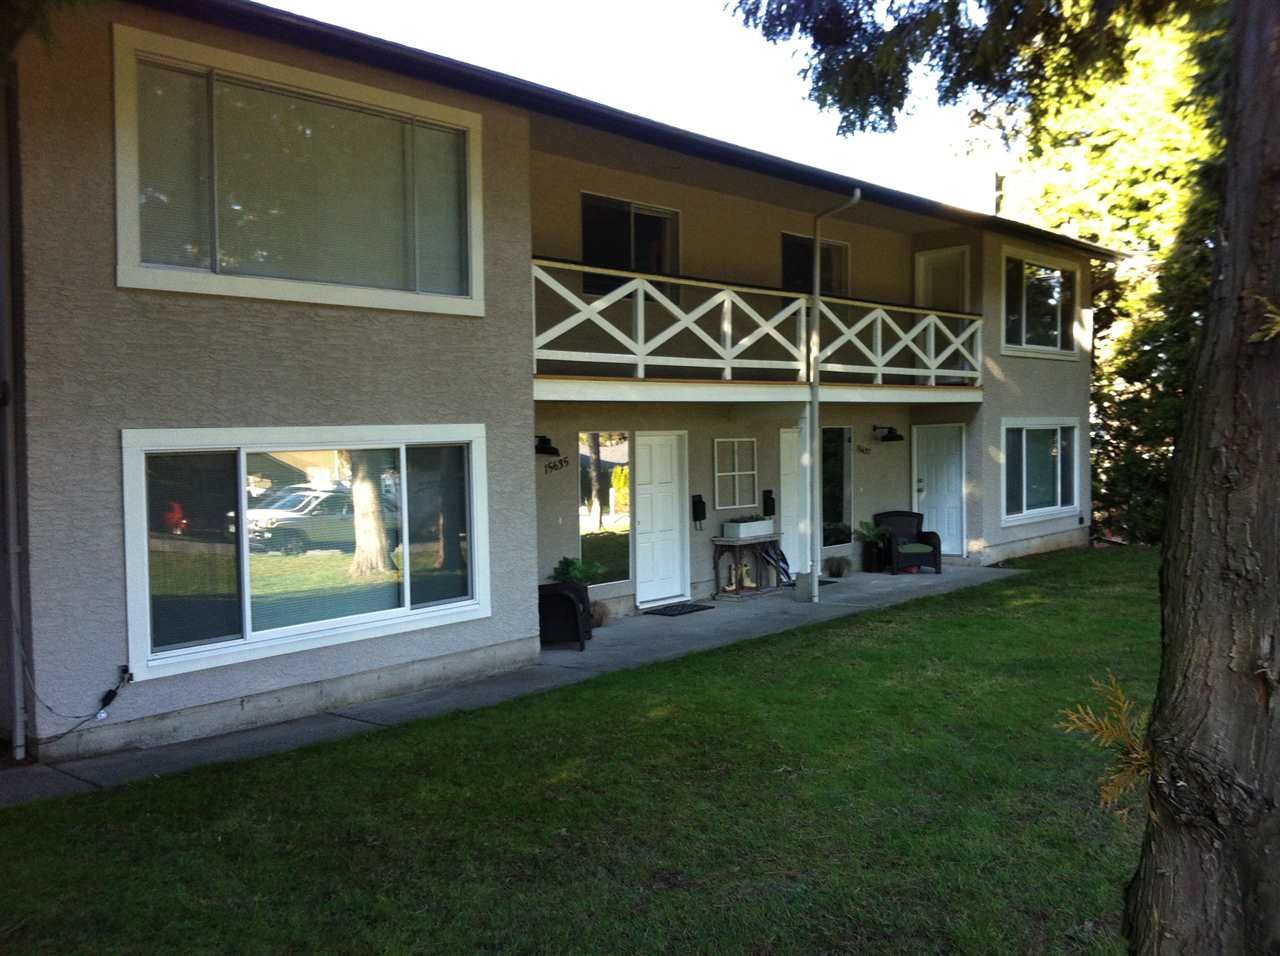 Main Photo: 15635 ASTER ROAD in Surrey: King George Corridor Multifamily for sale (South Surrey White Rock)  : MLS®# R2317140